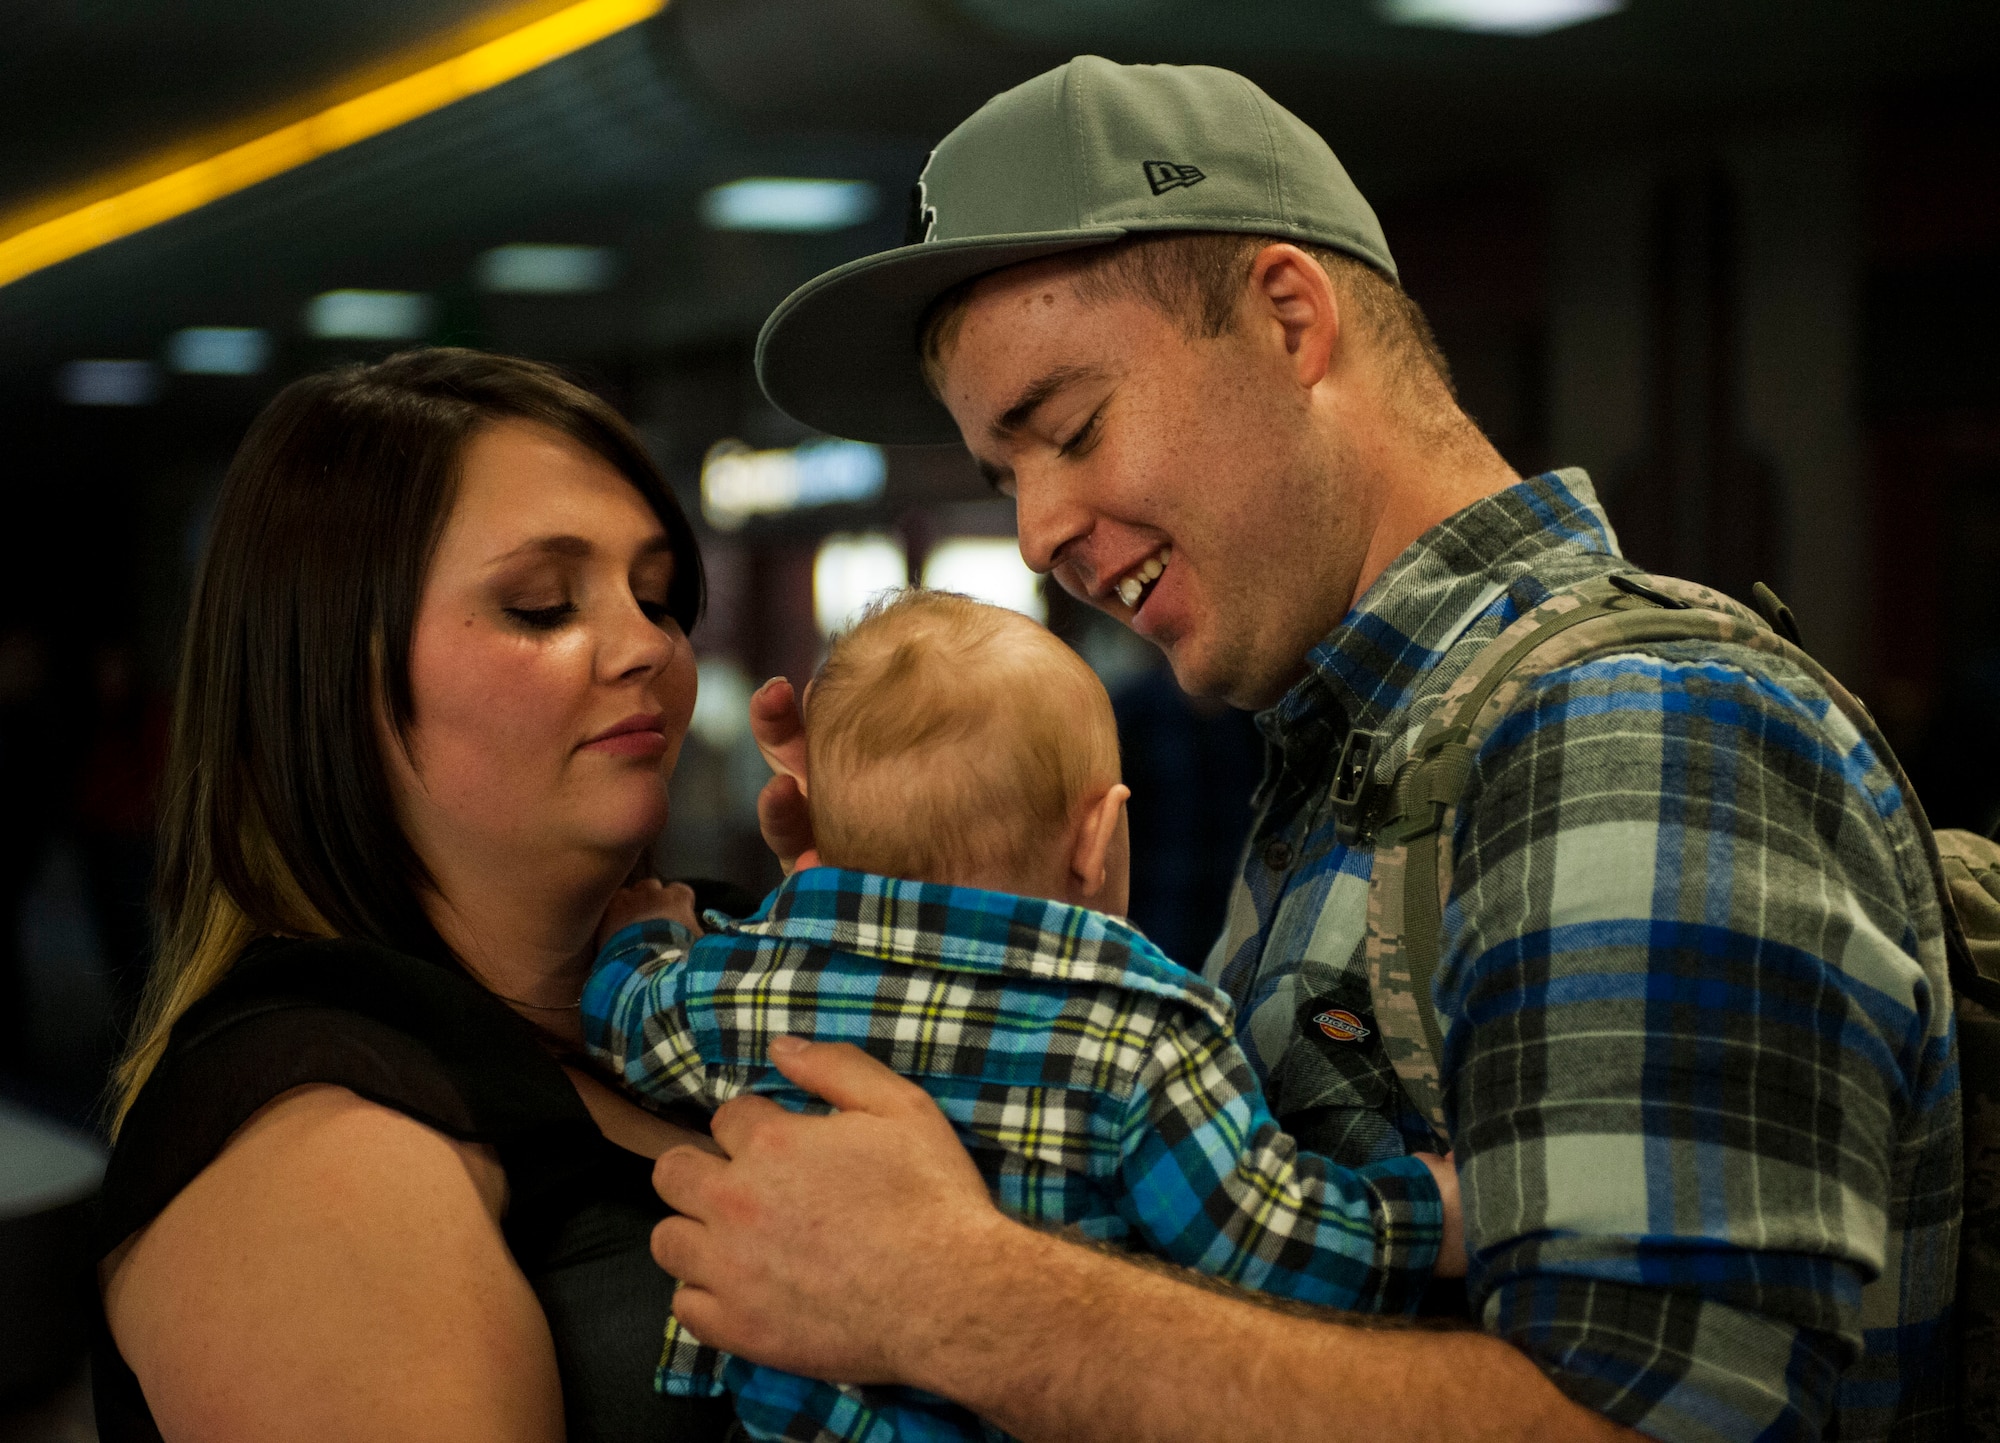 Senior Airman Tyler Havel, 926th Security Forces Squadron member, embraces his family at McCarran International Airport in Las Vegas, Oct. 22, after returning from a seven-month deployment to Southwest Asia. (U.S. Air Force photo by Airman 1st Class Jake Carter)